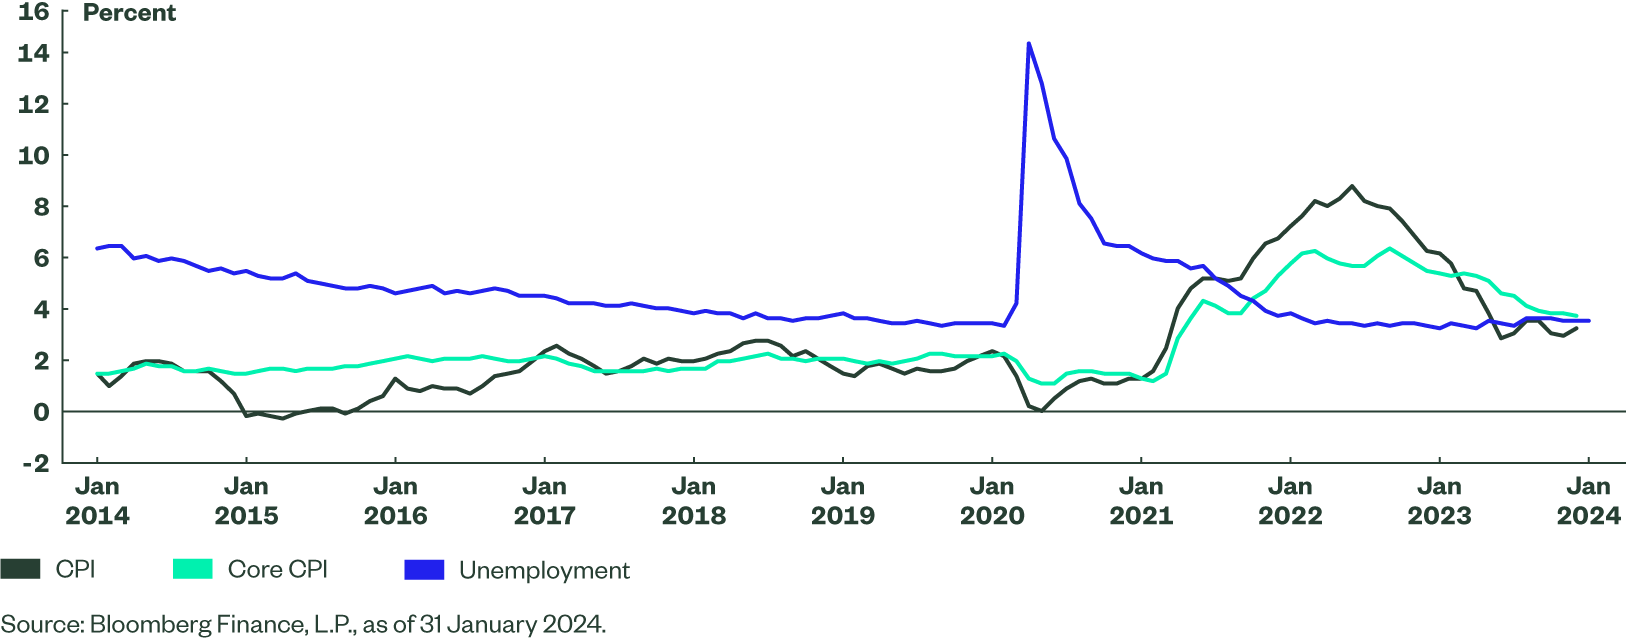 A line chart comparing CPI, core CPI, and unemployment figures in the US over the past 10 years.